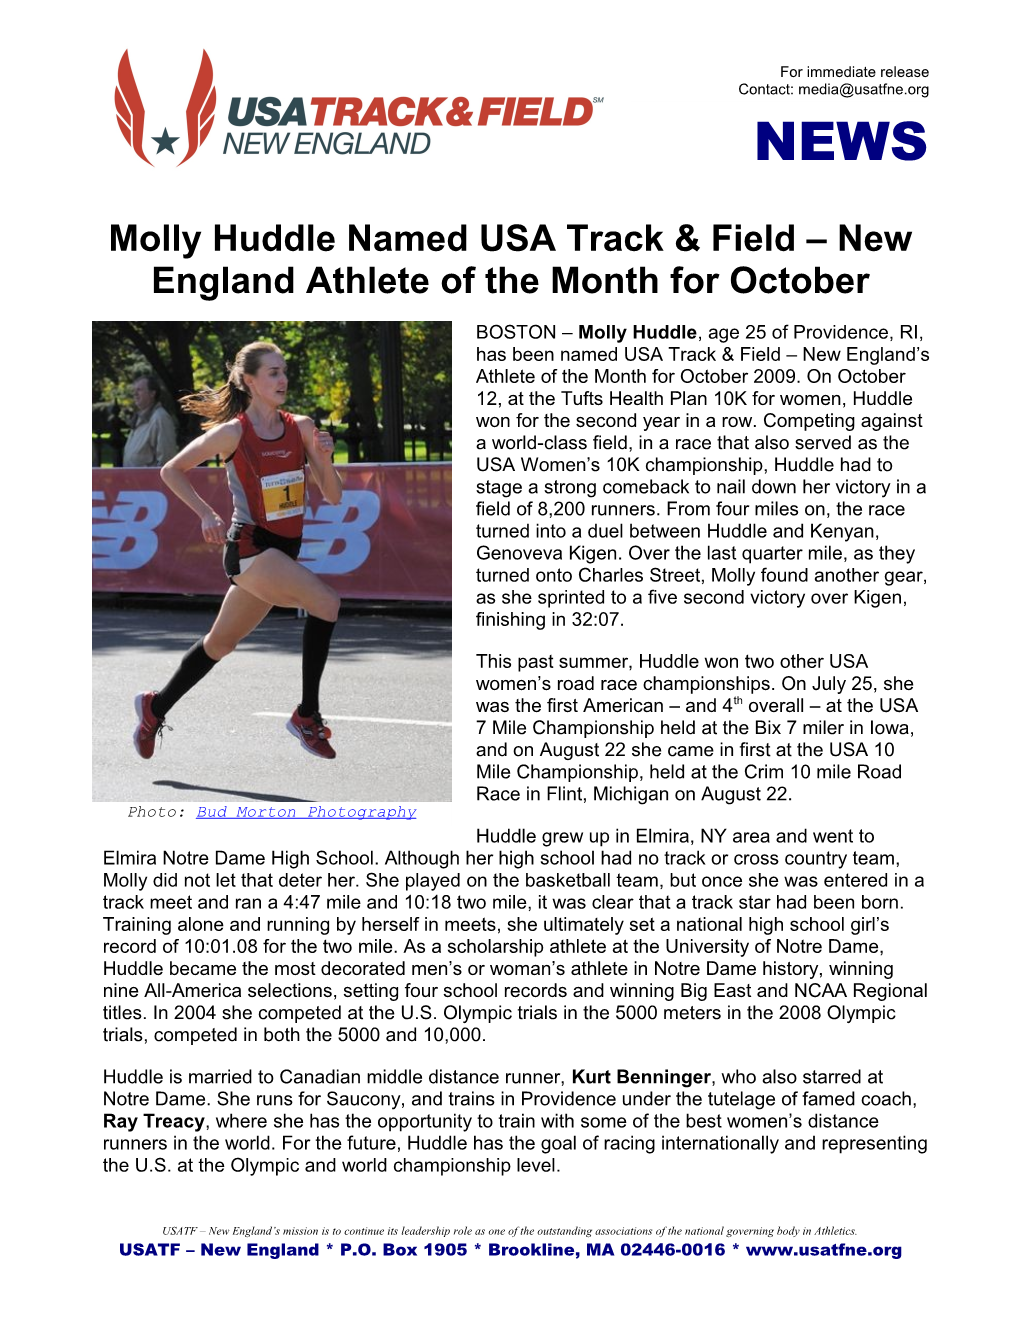 Molly Huddle Named USA Track & Field – New England Athlete of The